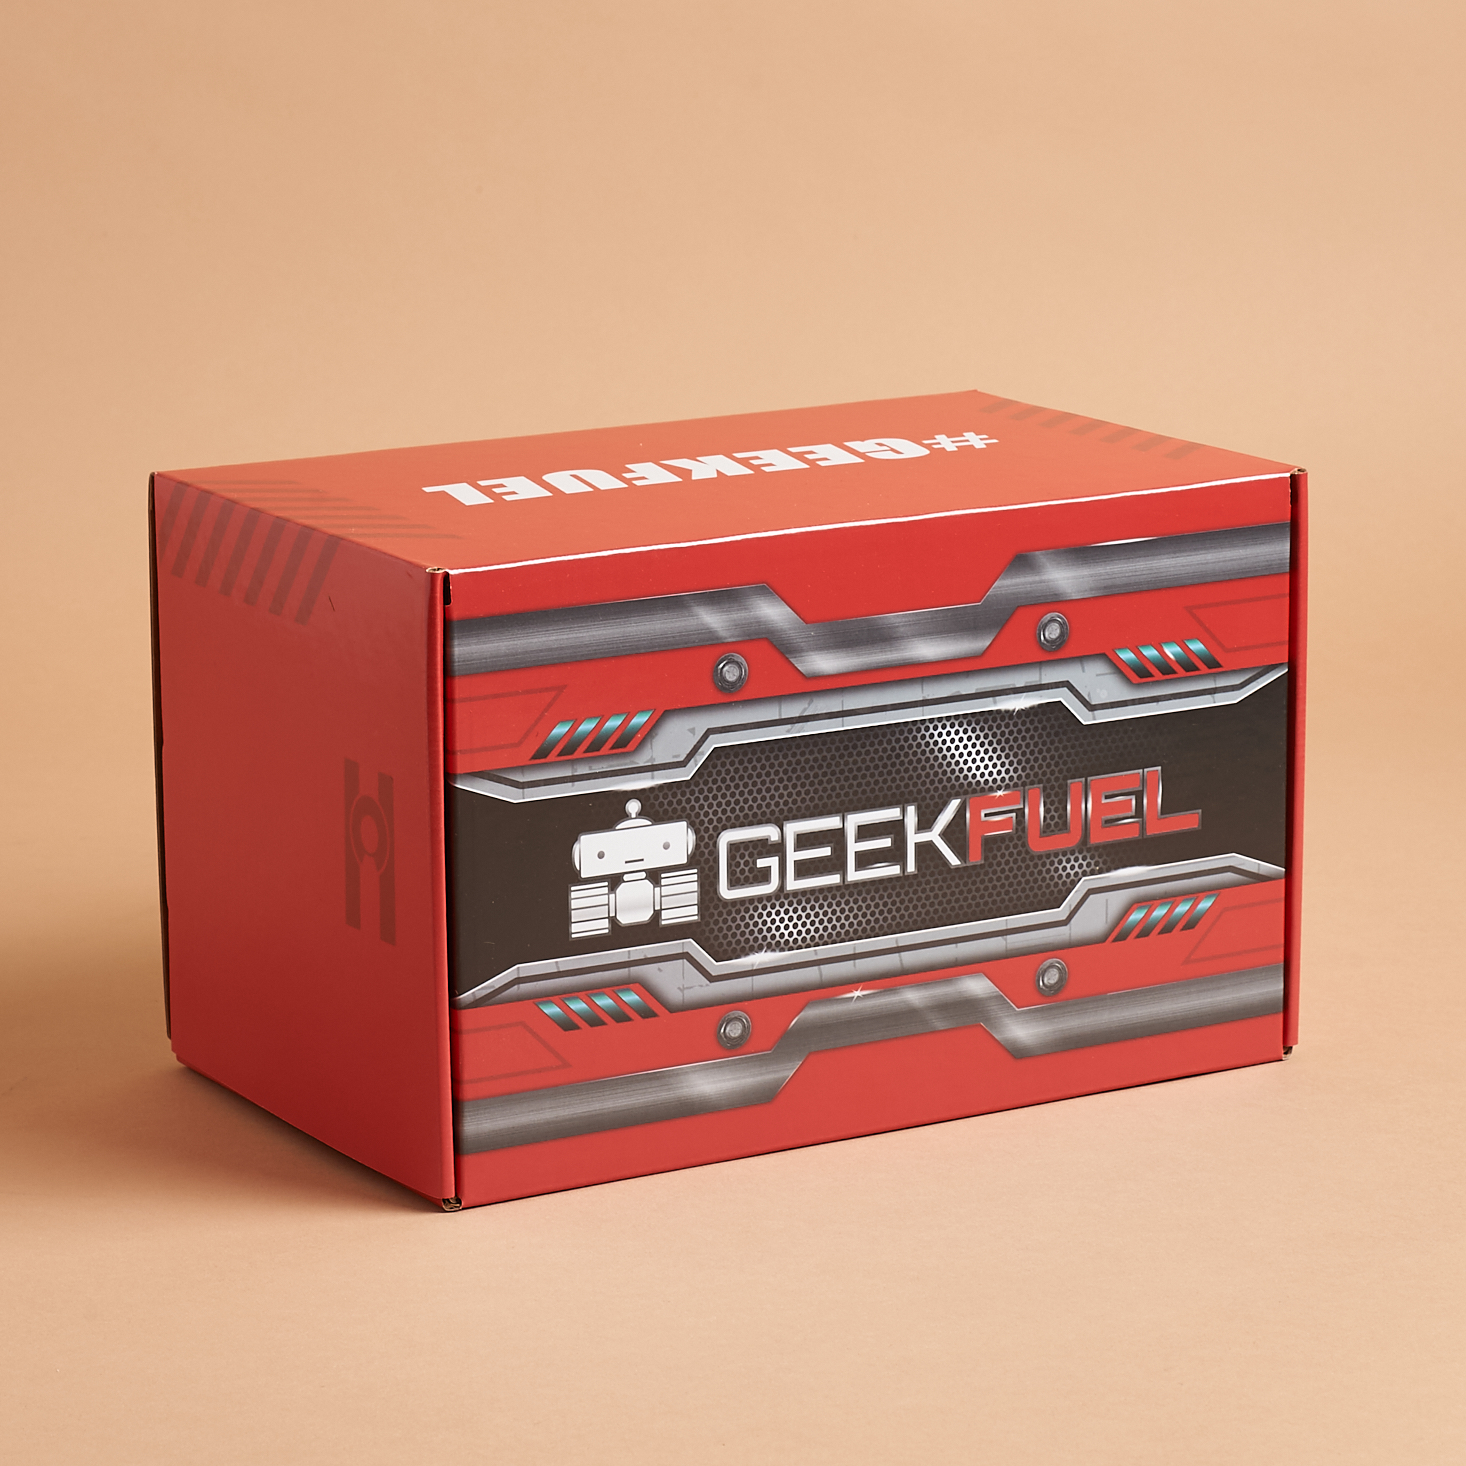 Geek Fuel April 2021 “Scallywag Edition” Review